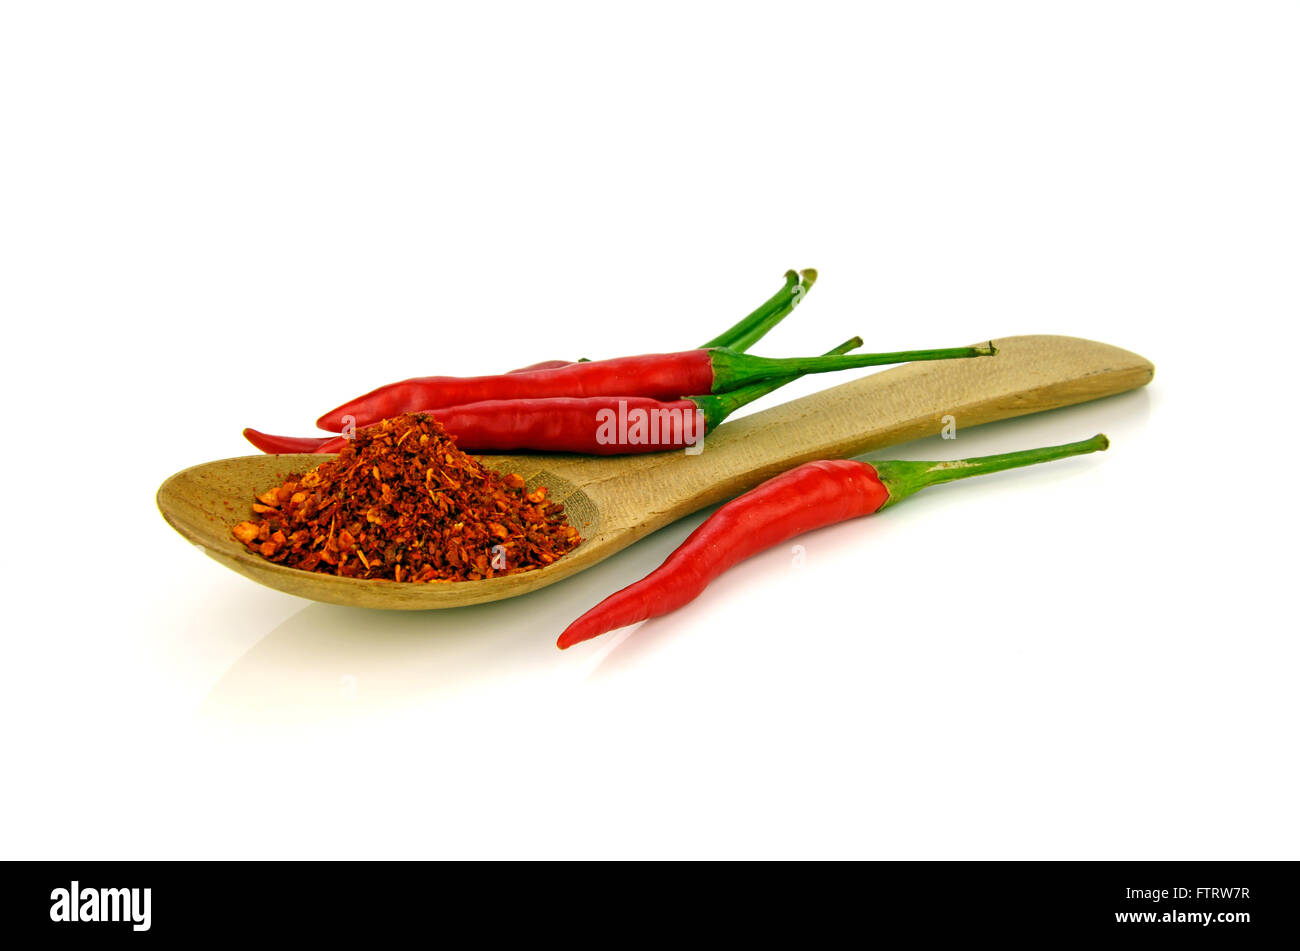 Red hot pepper chilli (Capsicum frutescens L.) with a spoon of cayenne pepper on white background. Stock Photo